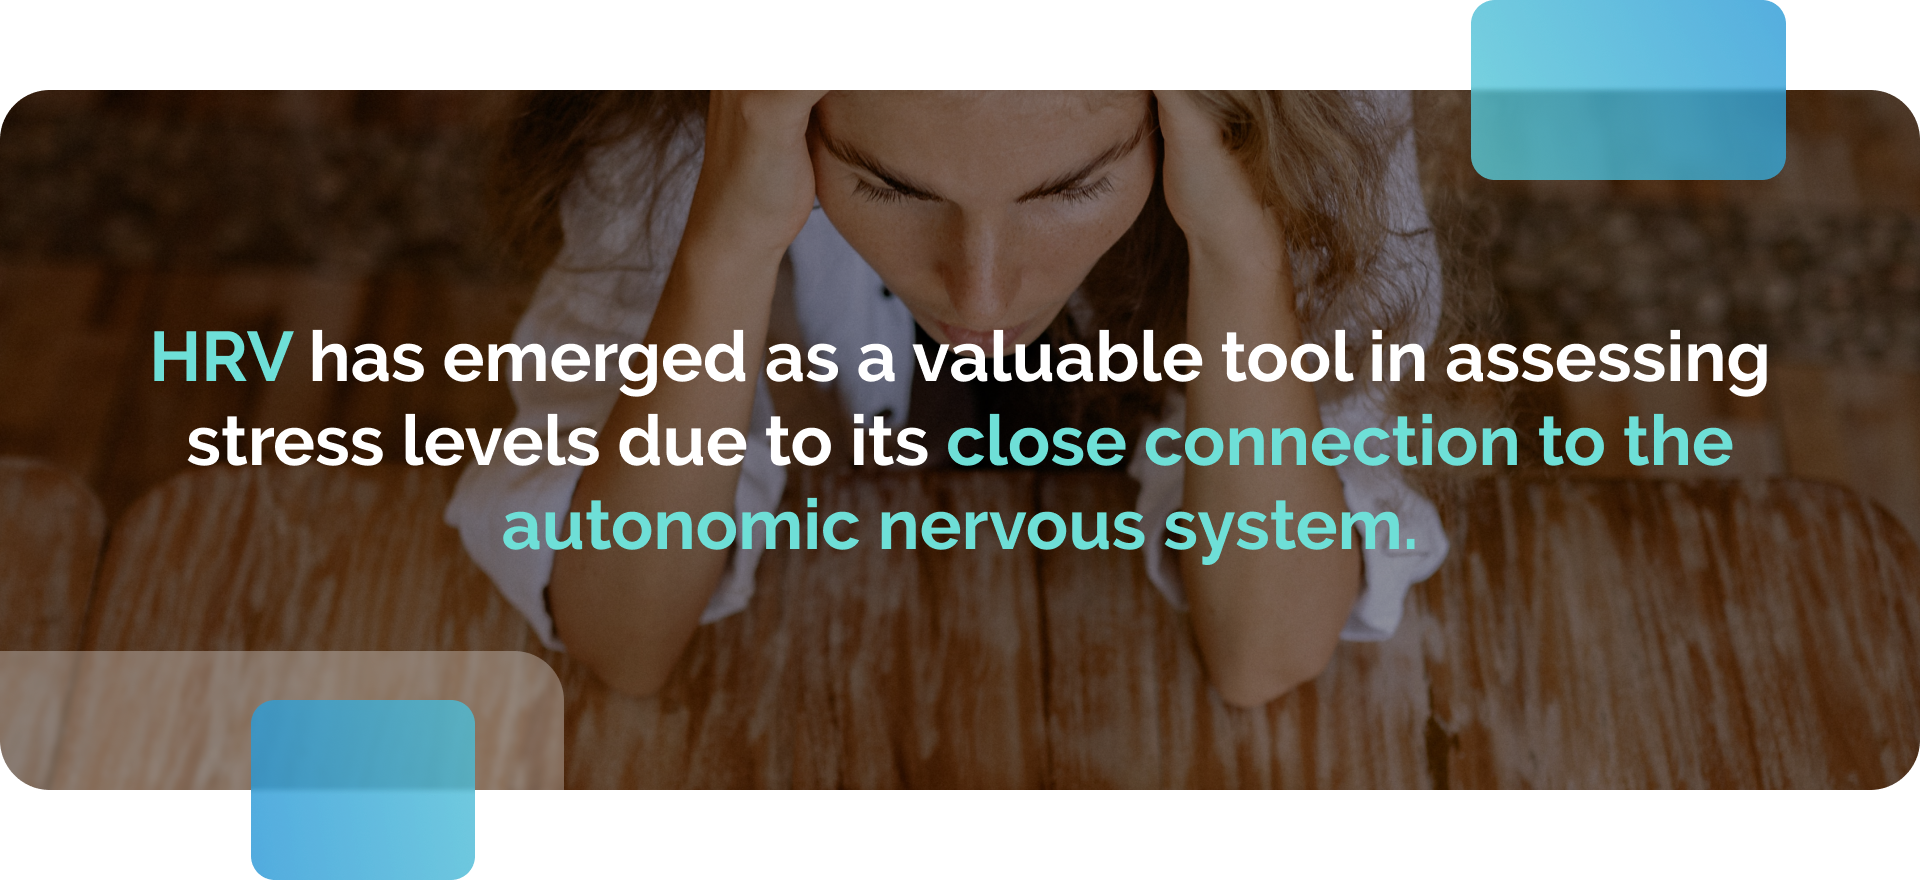 Stressed woman holding her head. Informational text in the image: "HRV has emerged as a valuable tool in assessing stress levels due to its close connection to the autonomic nervous system."